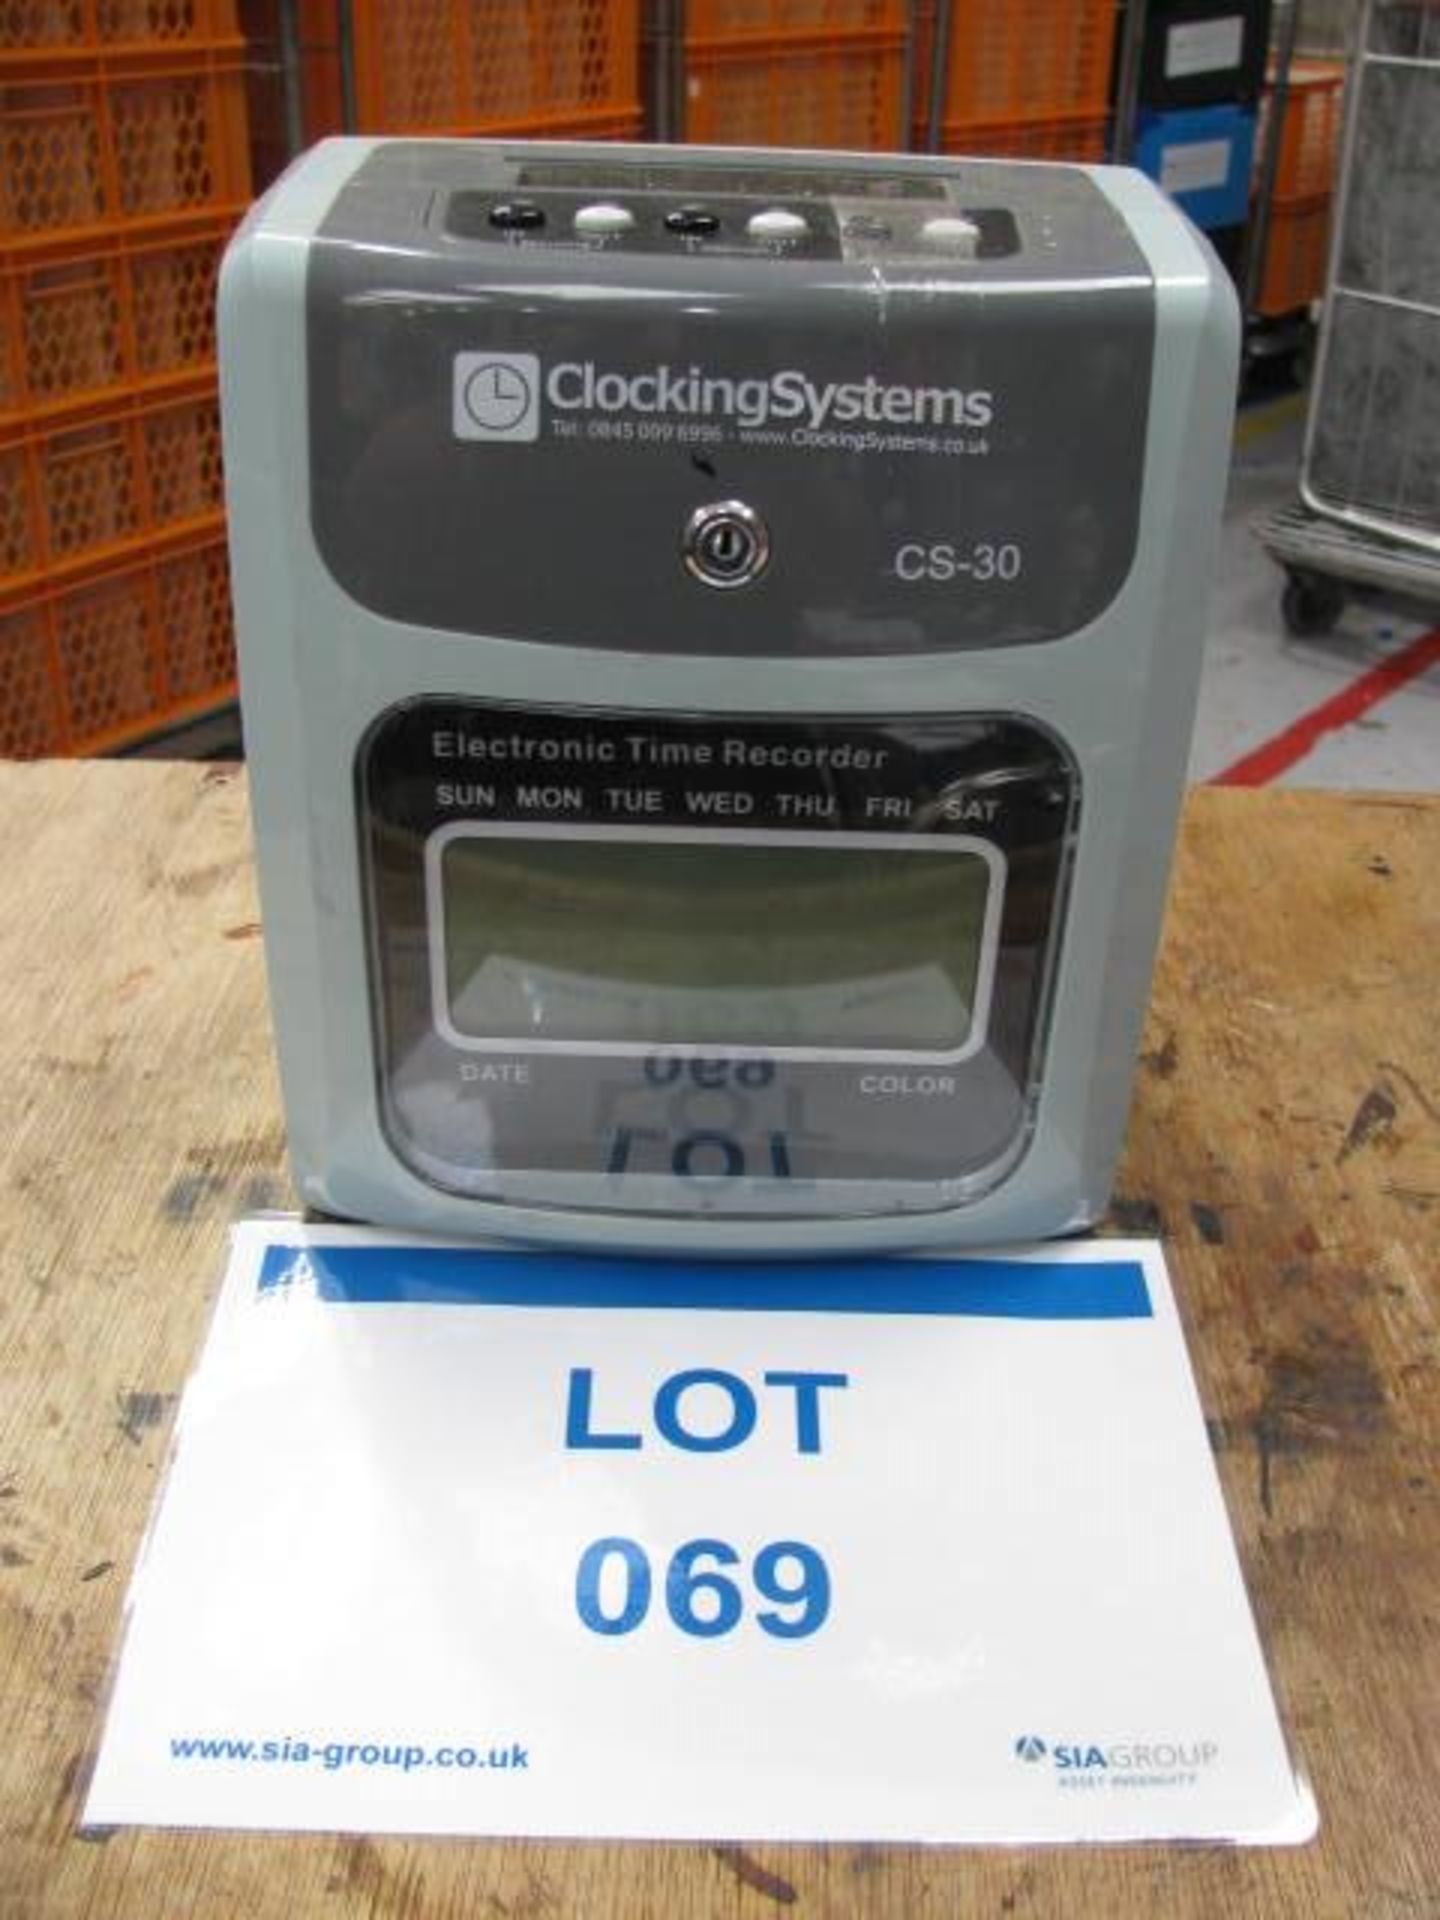 Clocking Systems Model C530 electronic time recorder, Serial No. HS201508354, 240v